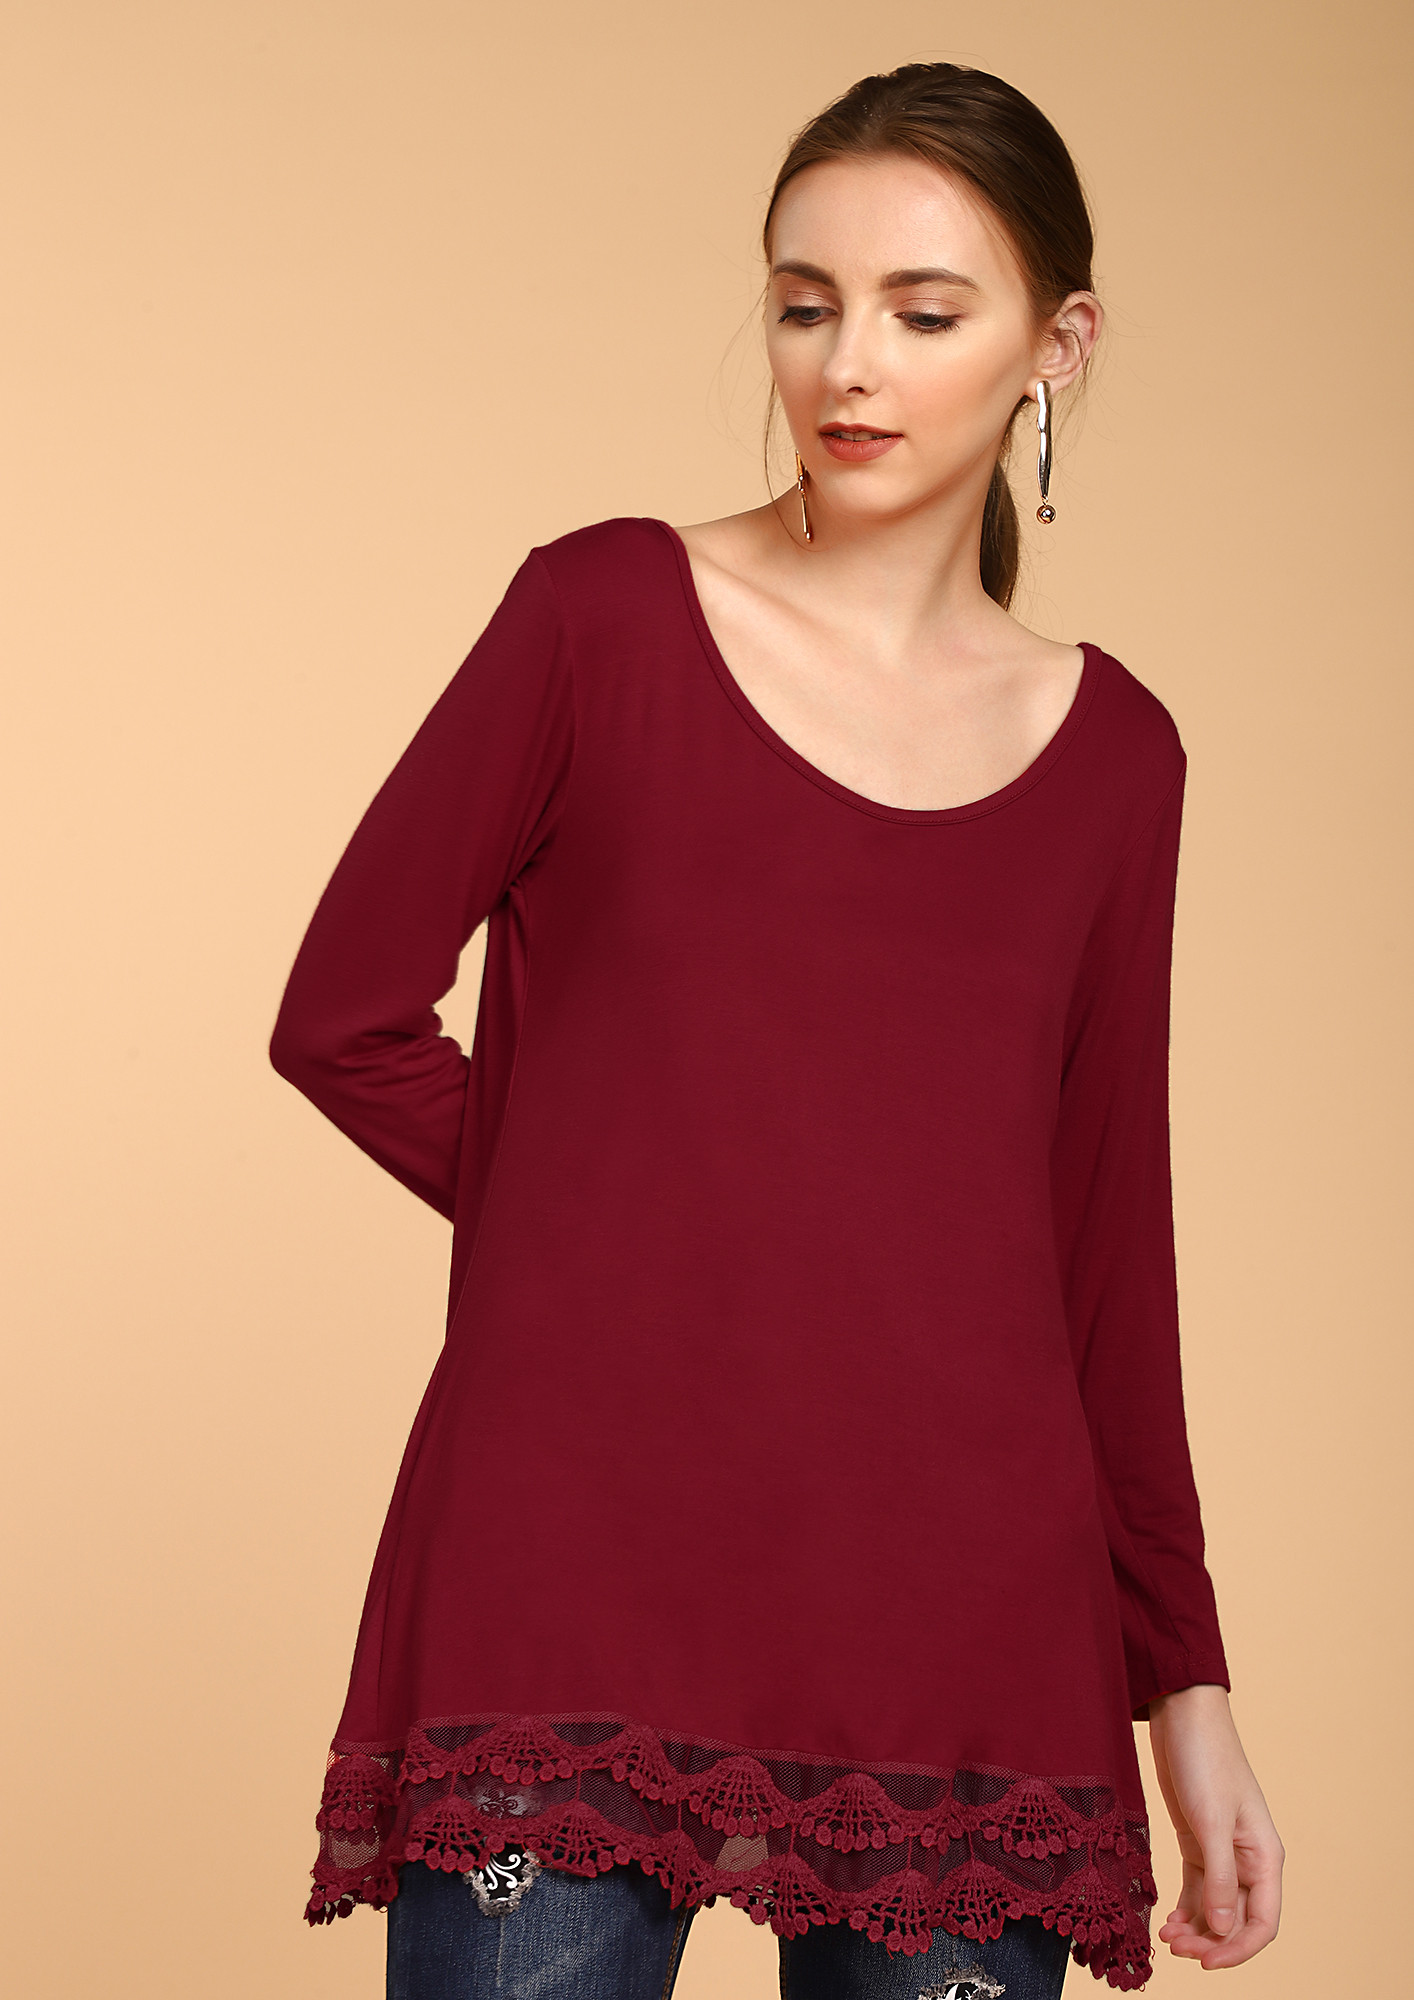 FROM AM TO PM WINE TUNIC TOP